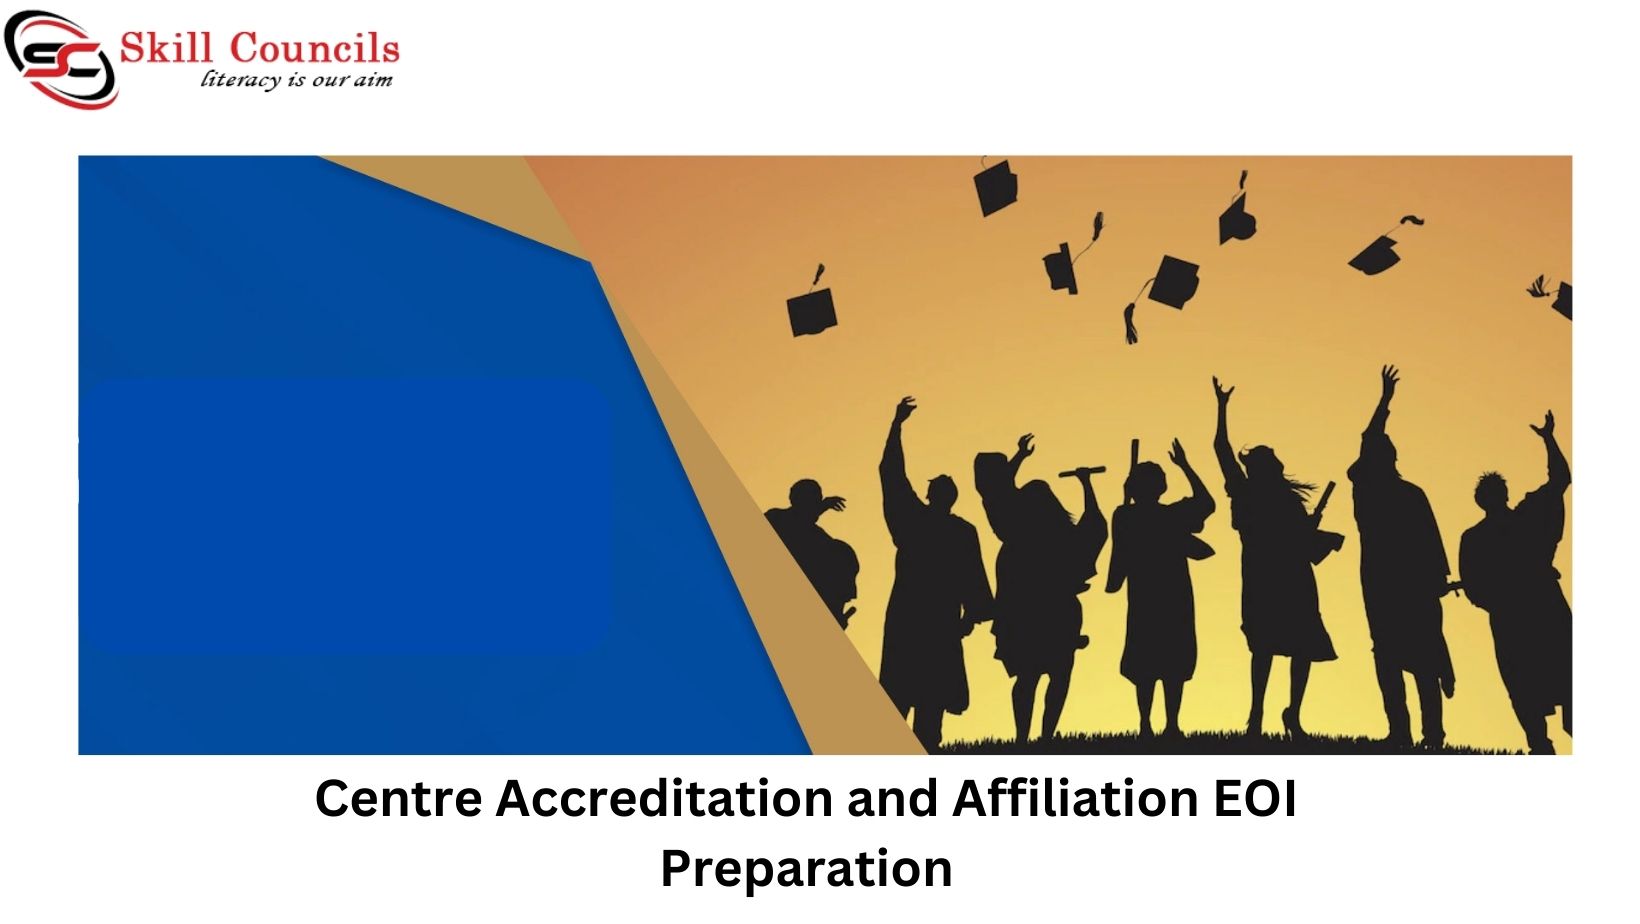 8 Tips for Successful Centre Accreditation and Affiliation